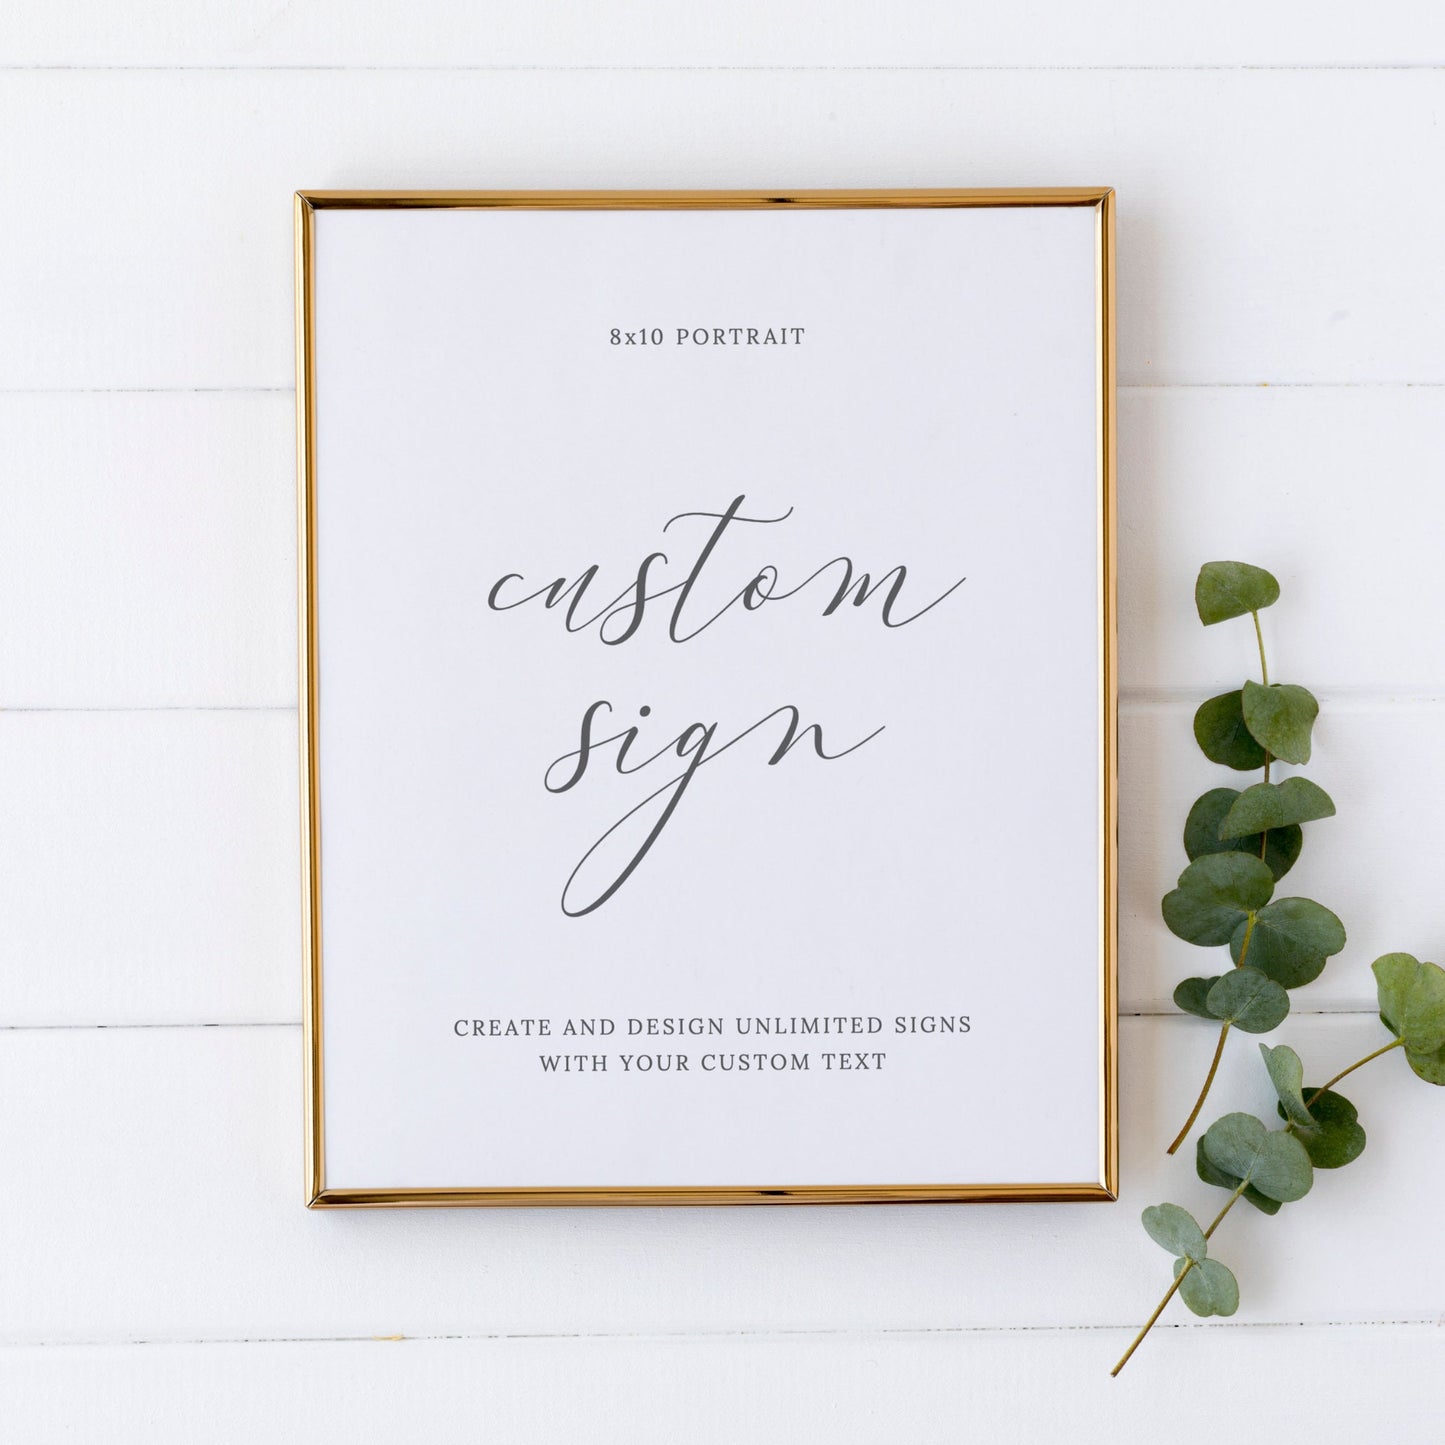 Editable Custom Wedding Sign Script Wedding Sign Kit Create Unlimited Signs 8x10 and 10x8 Template